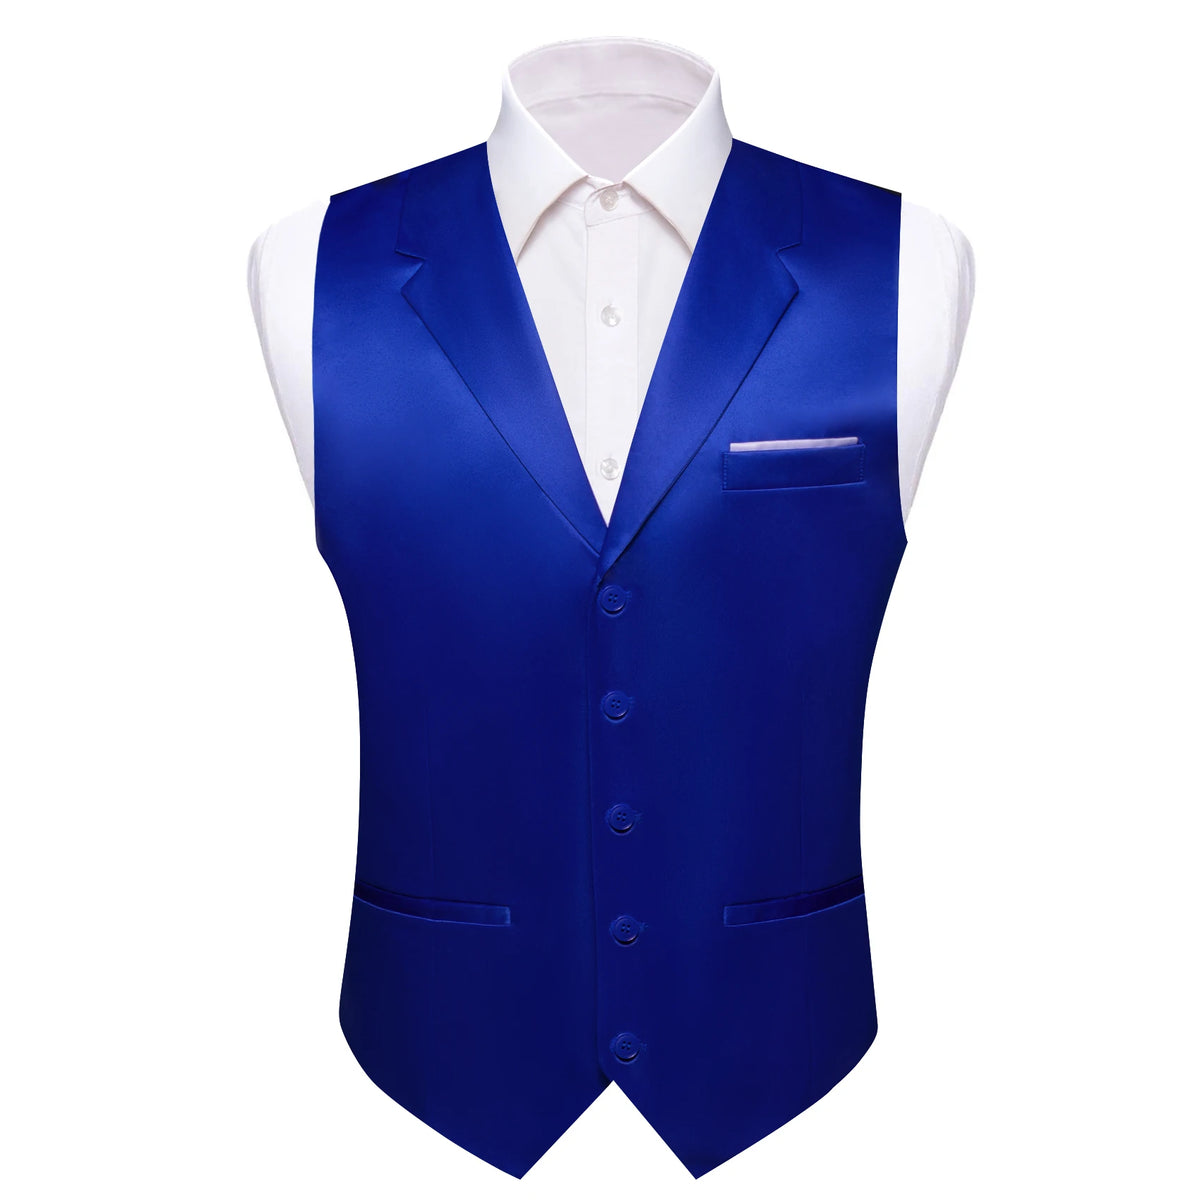 a blue vest and white shirt on a mannequin